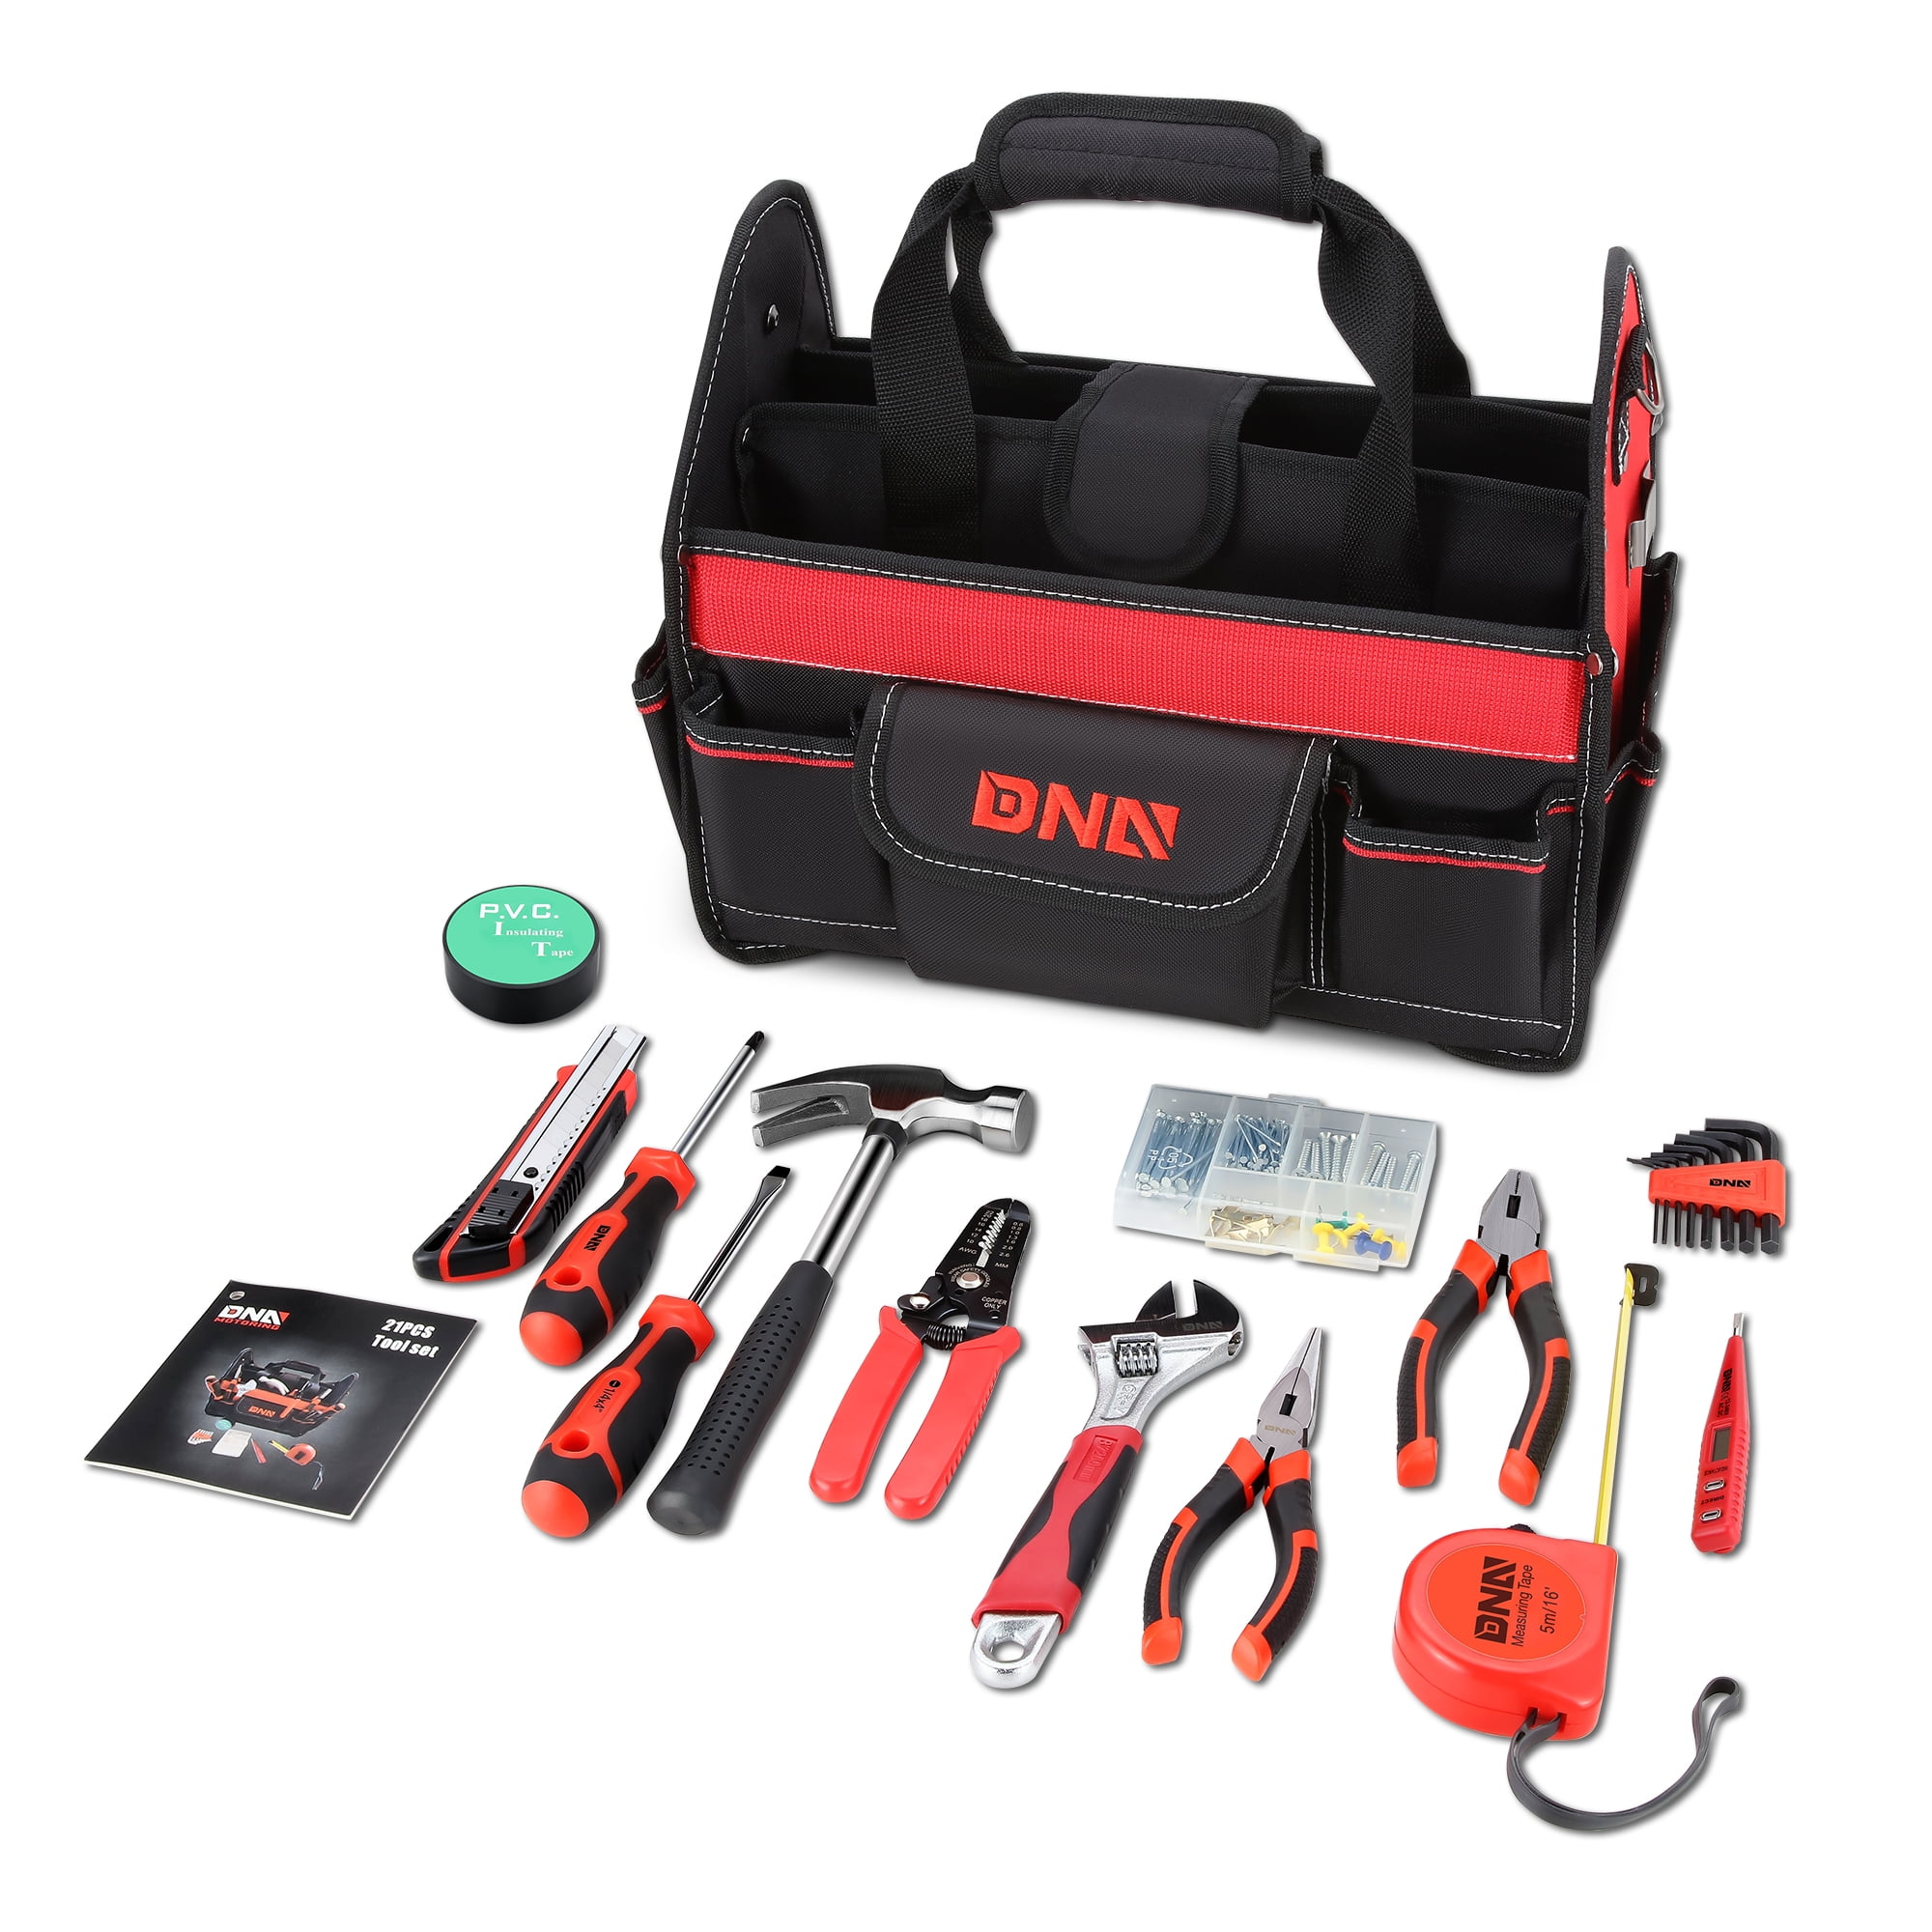 Household Tools Set Multifunctional Hand Tool Box For Electronic Computer  Bike Use Knife Plier Screwdriver Hammer Repair Kit - AliExpress